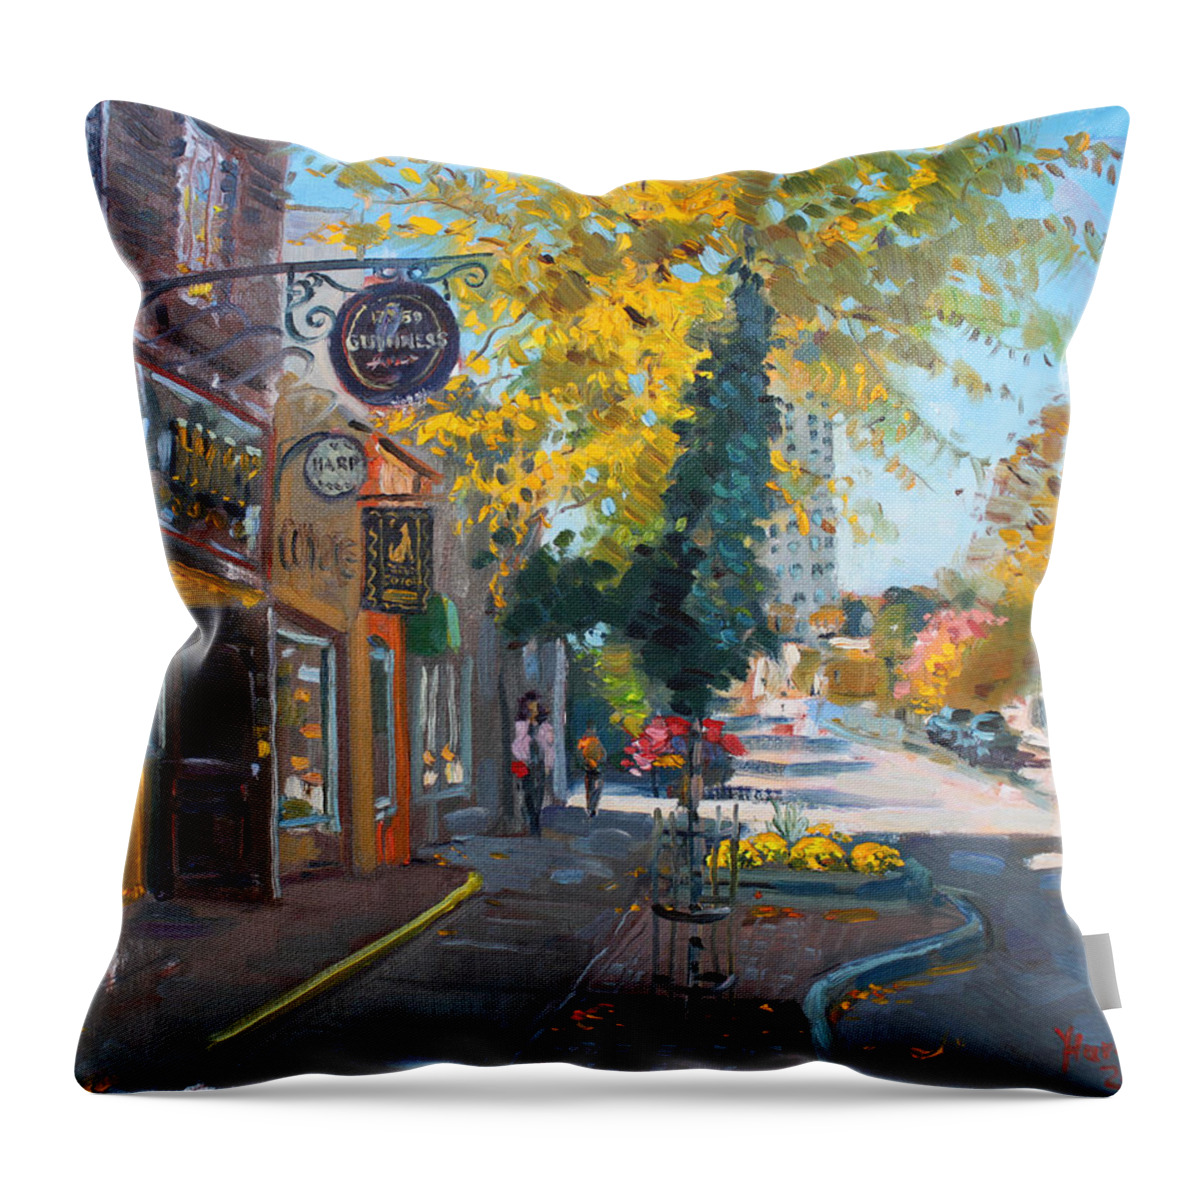 River Coyote Gallery Throw Pillow featuring the painting River Coyote Gallery Mississauga by Ylli Haruni